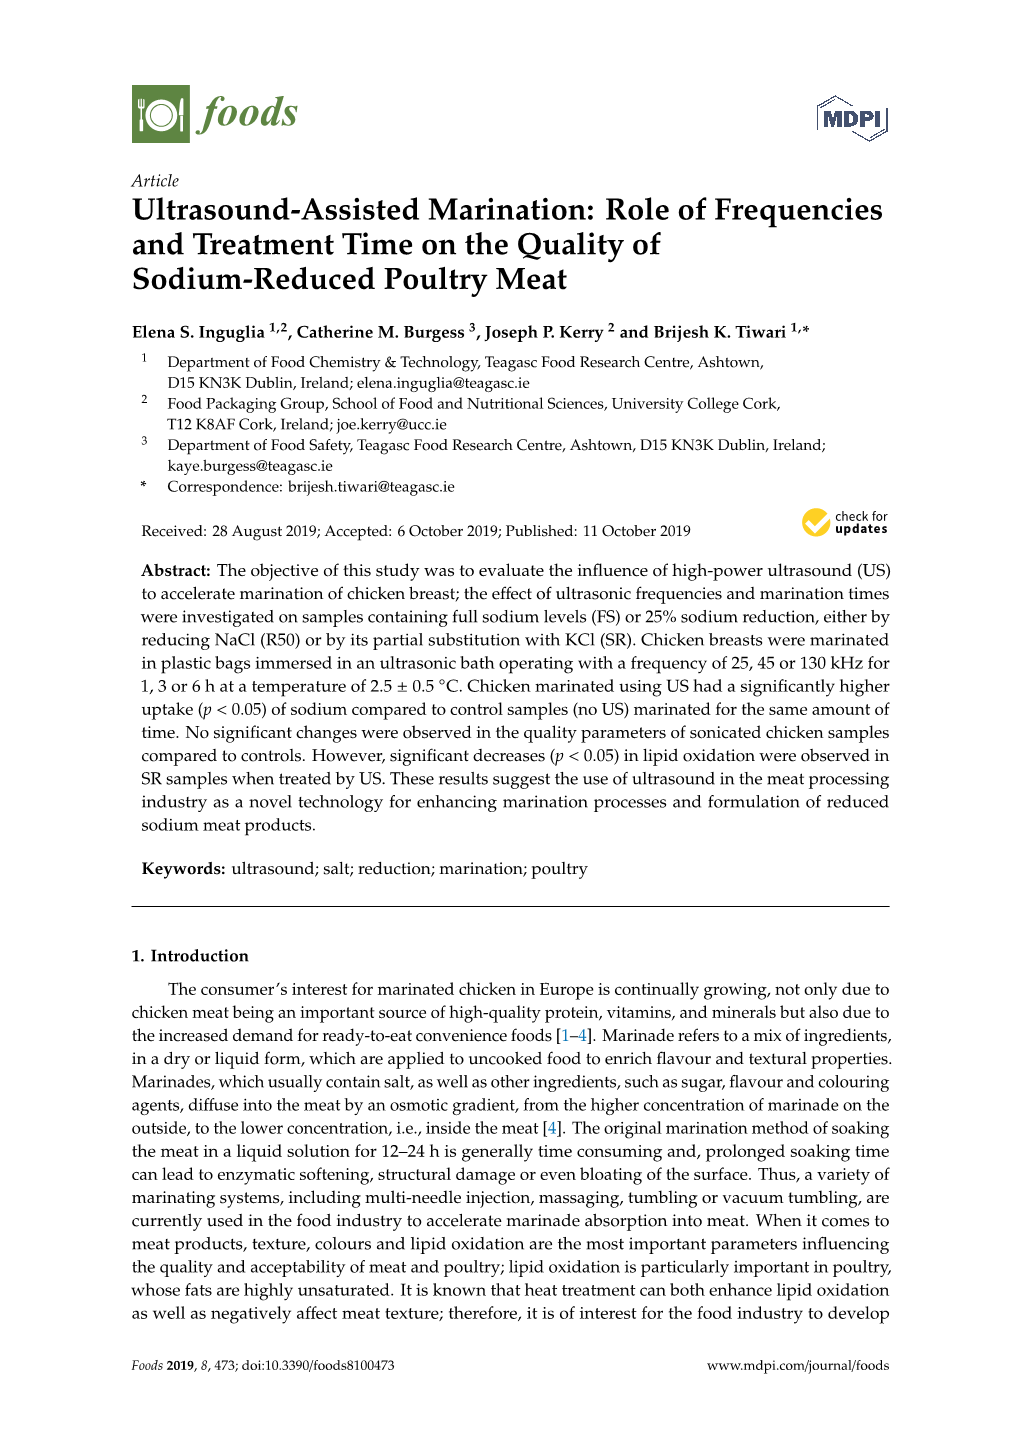 Ultrasound-Assisted Marination: Role of Frequencies and Treatment Time on the Quality of Sodium-Reduced Poultry Meat